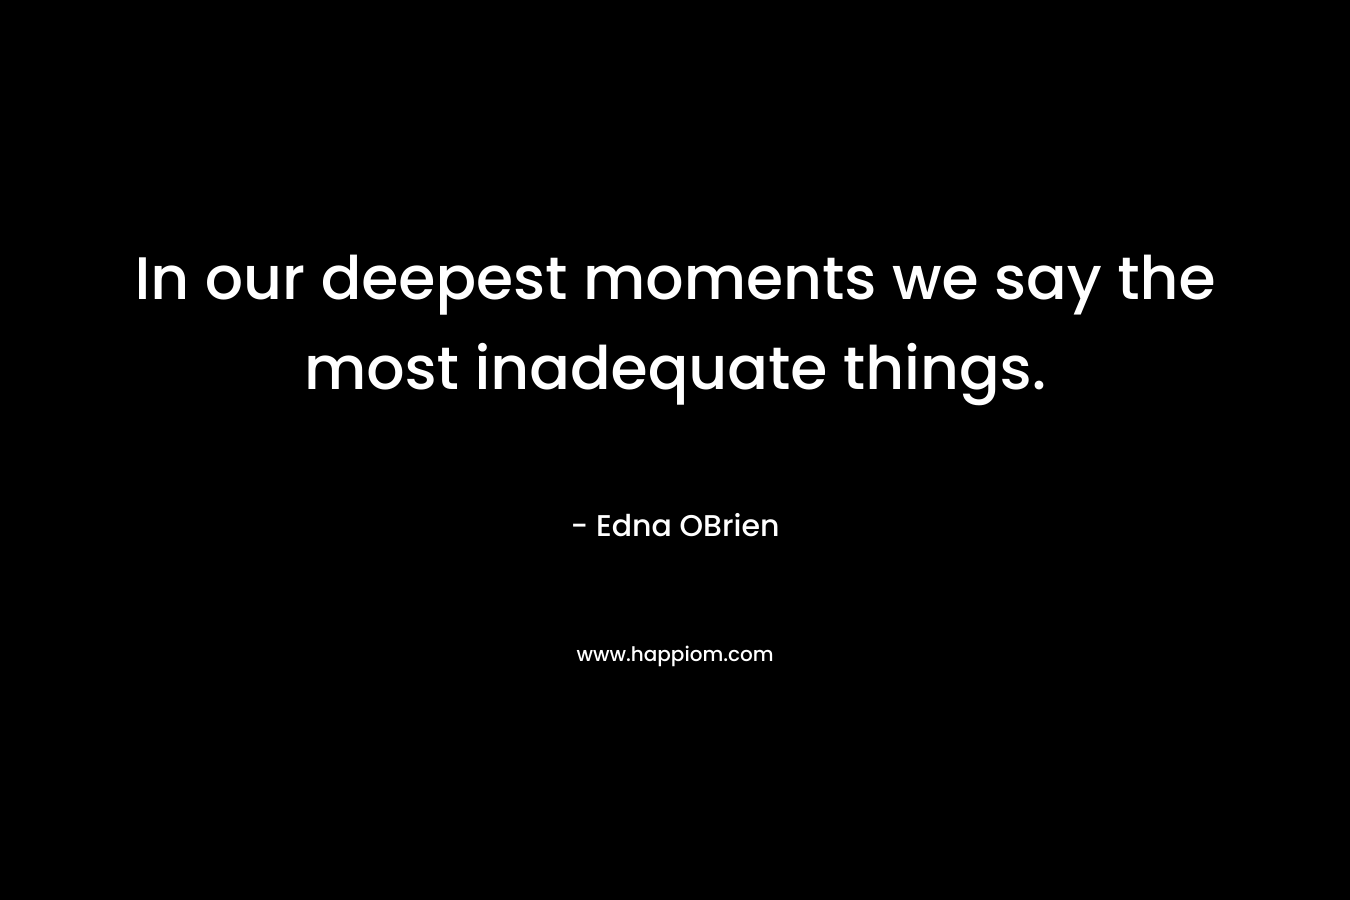 In our deepest moments we say the most inadequate things.